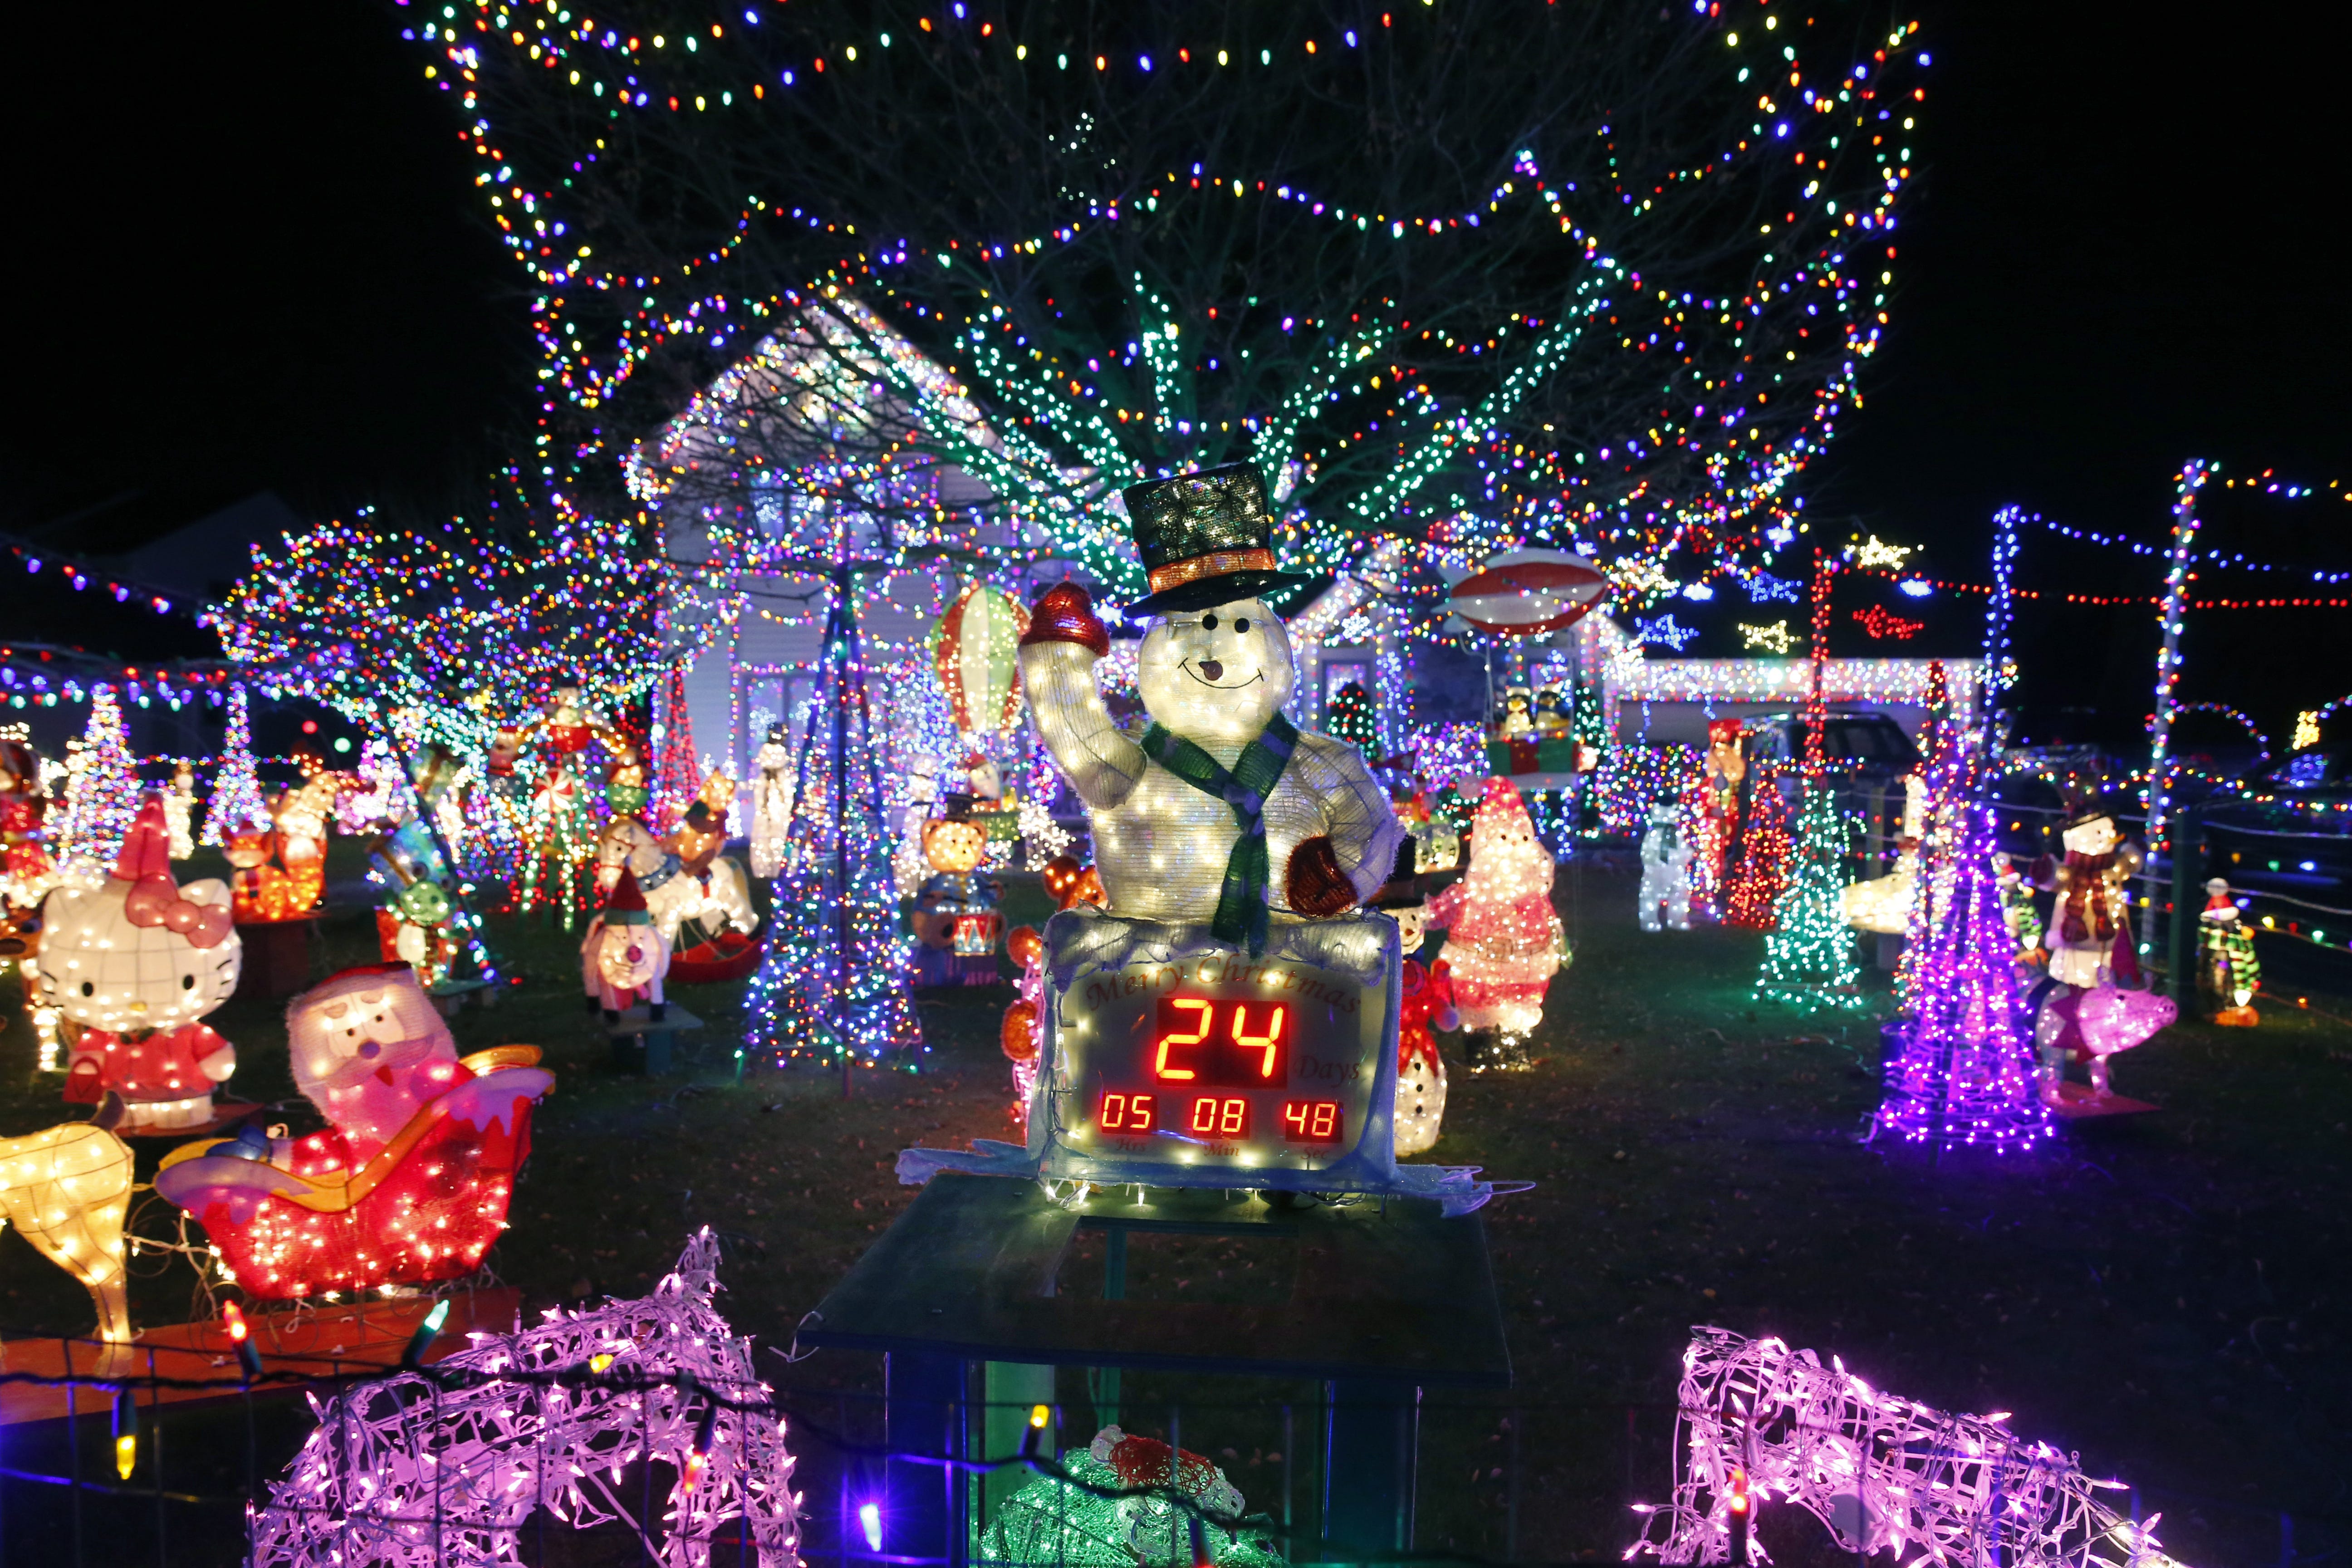 Webster Christmas light display includes 50,000 bulbs and 13 years of countless memories